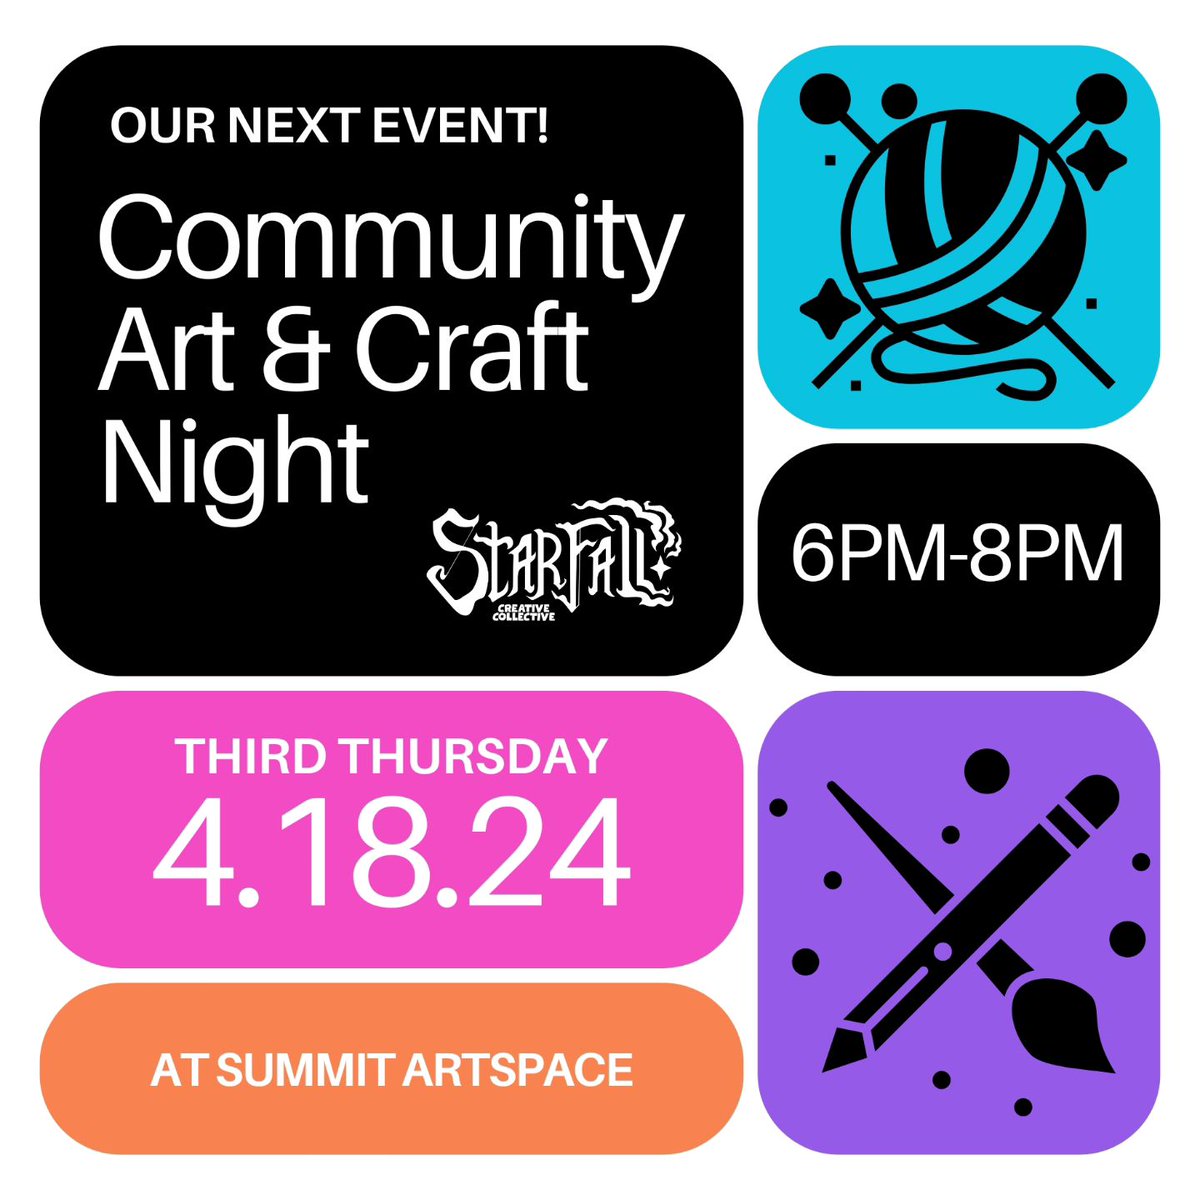 Join Starfall Collective at Summit Artspace tonight at 6 pm for Community Art & Craft Night. Bring a project, activity, or sketchbook & get creative with other cool, creative people. #downtownAKR #trysomethingNew #artsAndCrafts #Akron